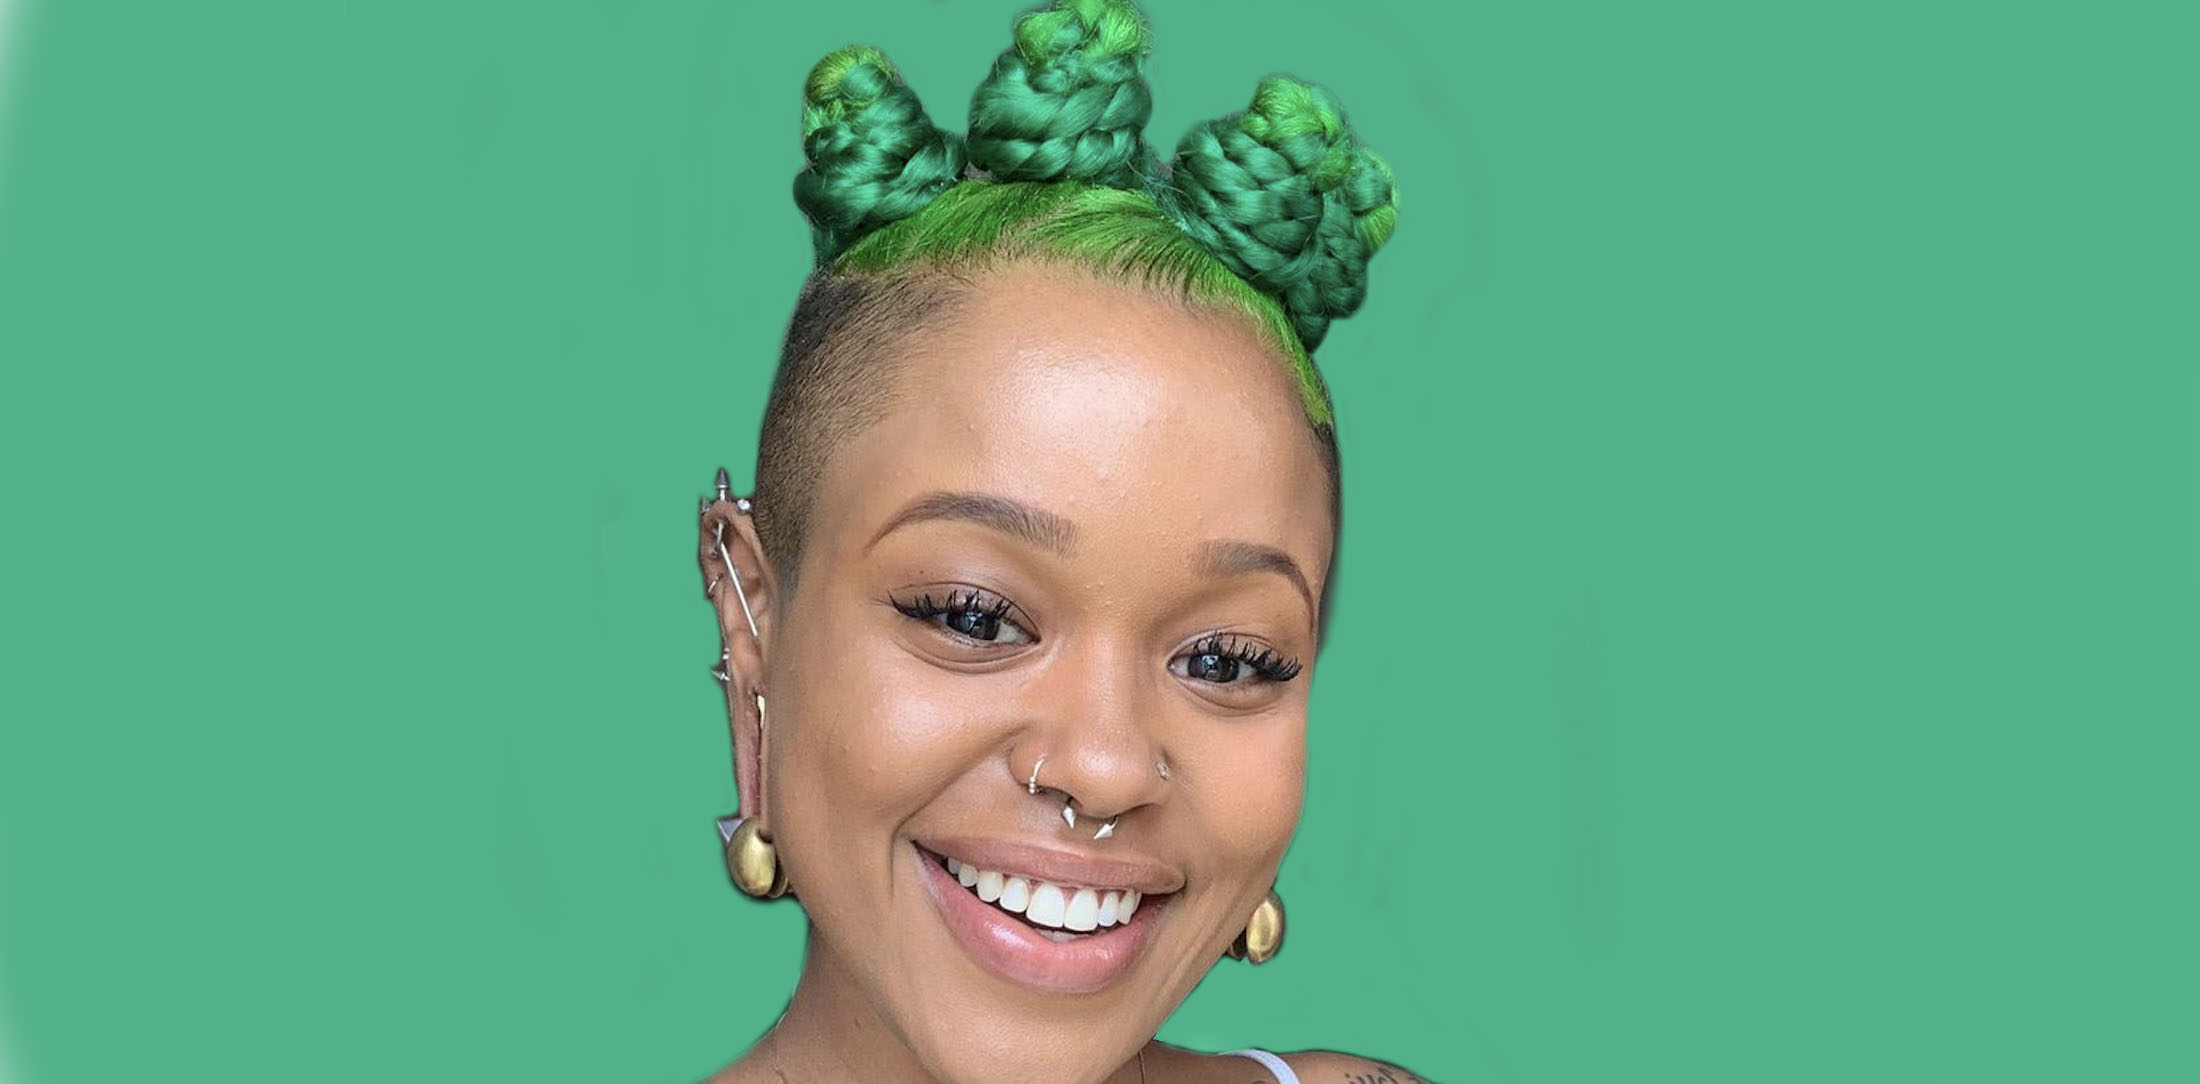 Bantu Knots Are Getting A Colorful Revamp